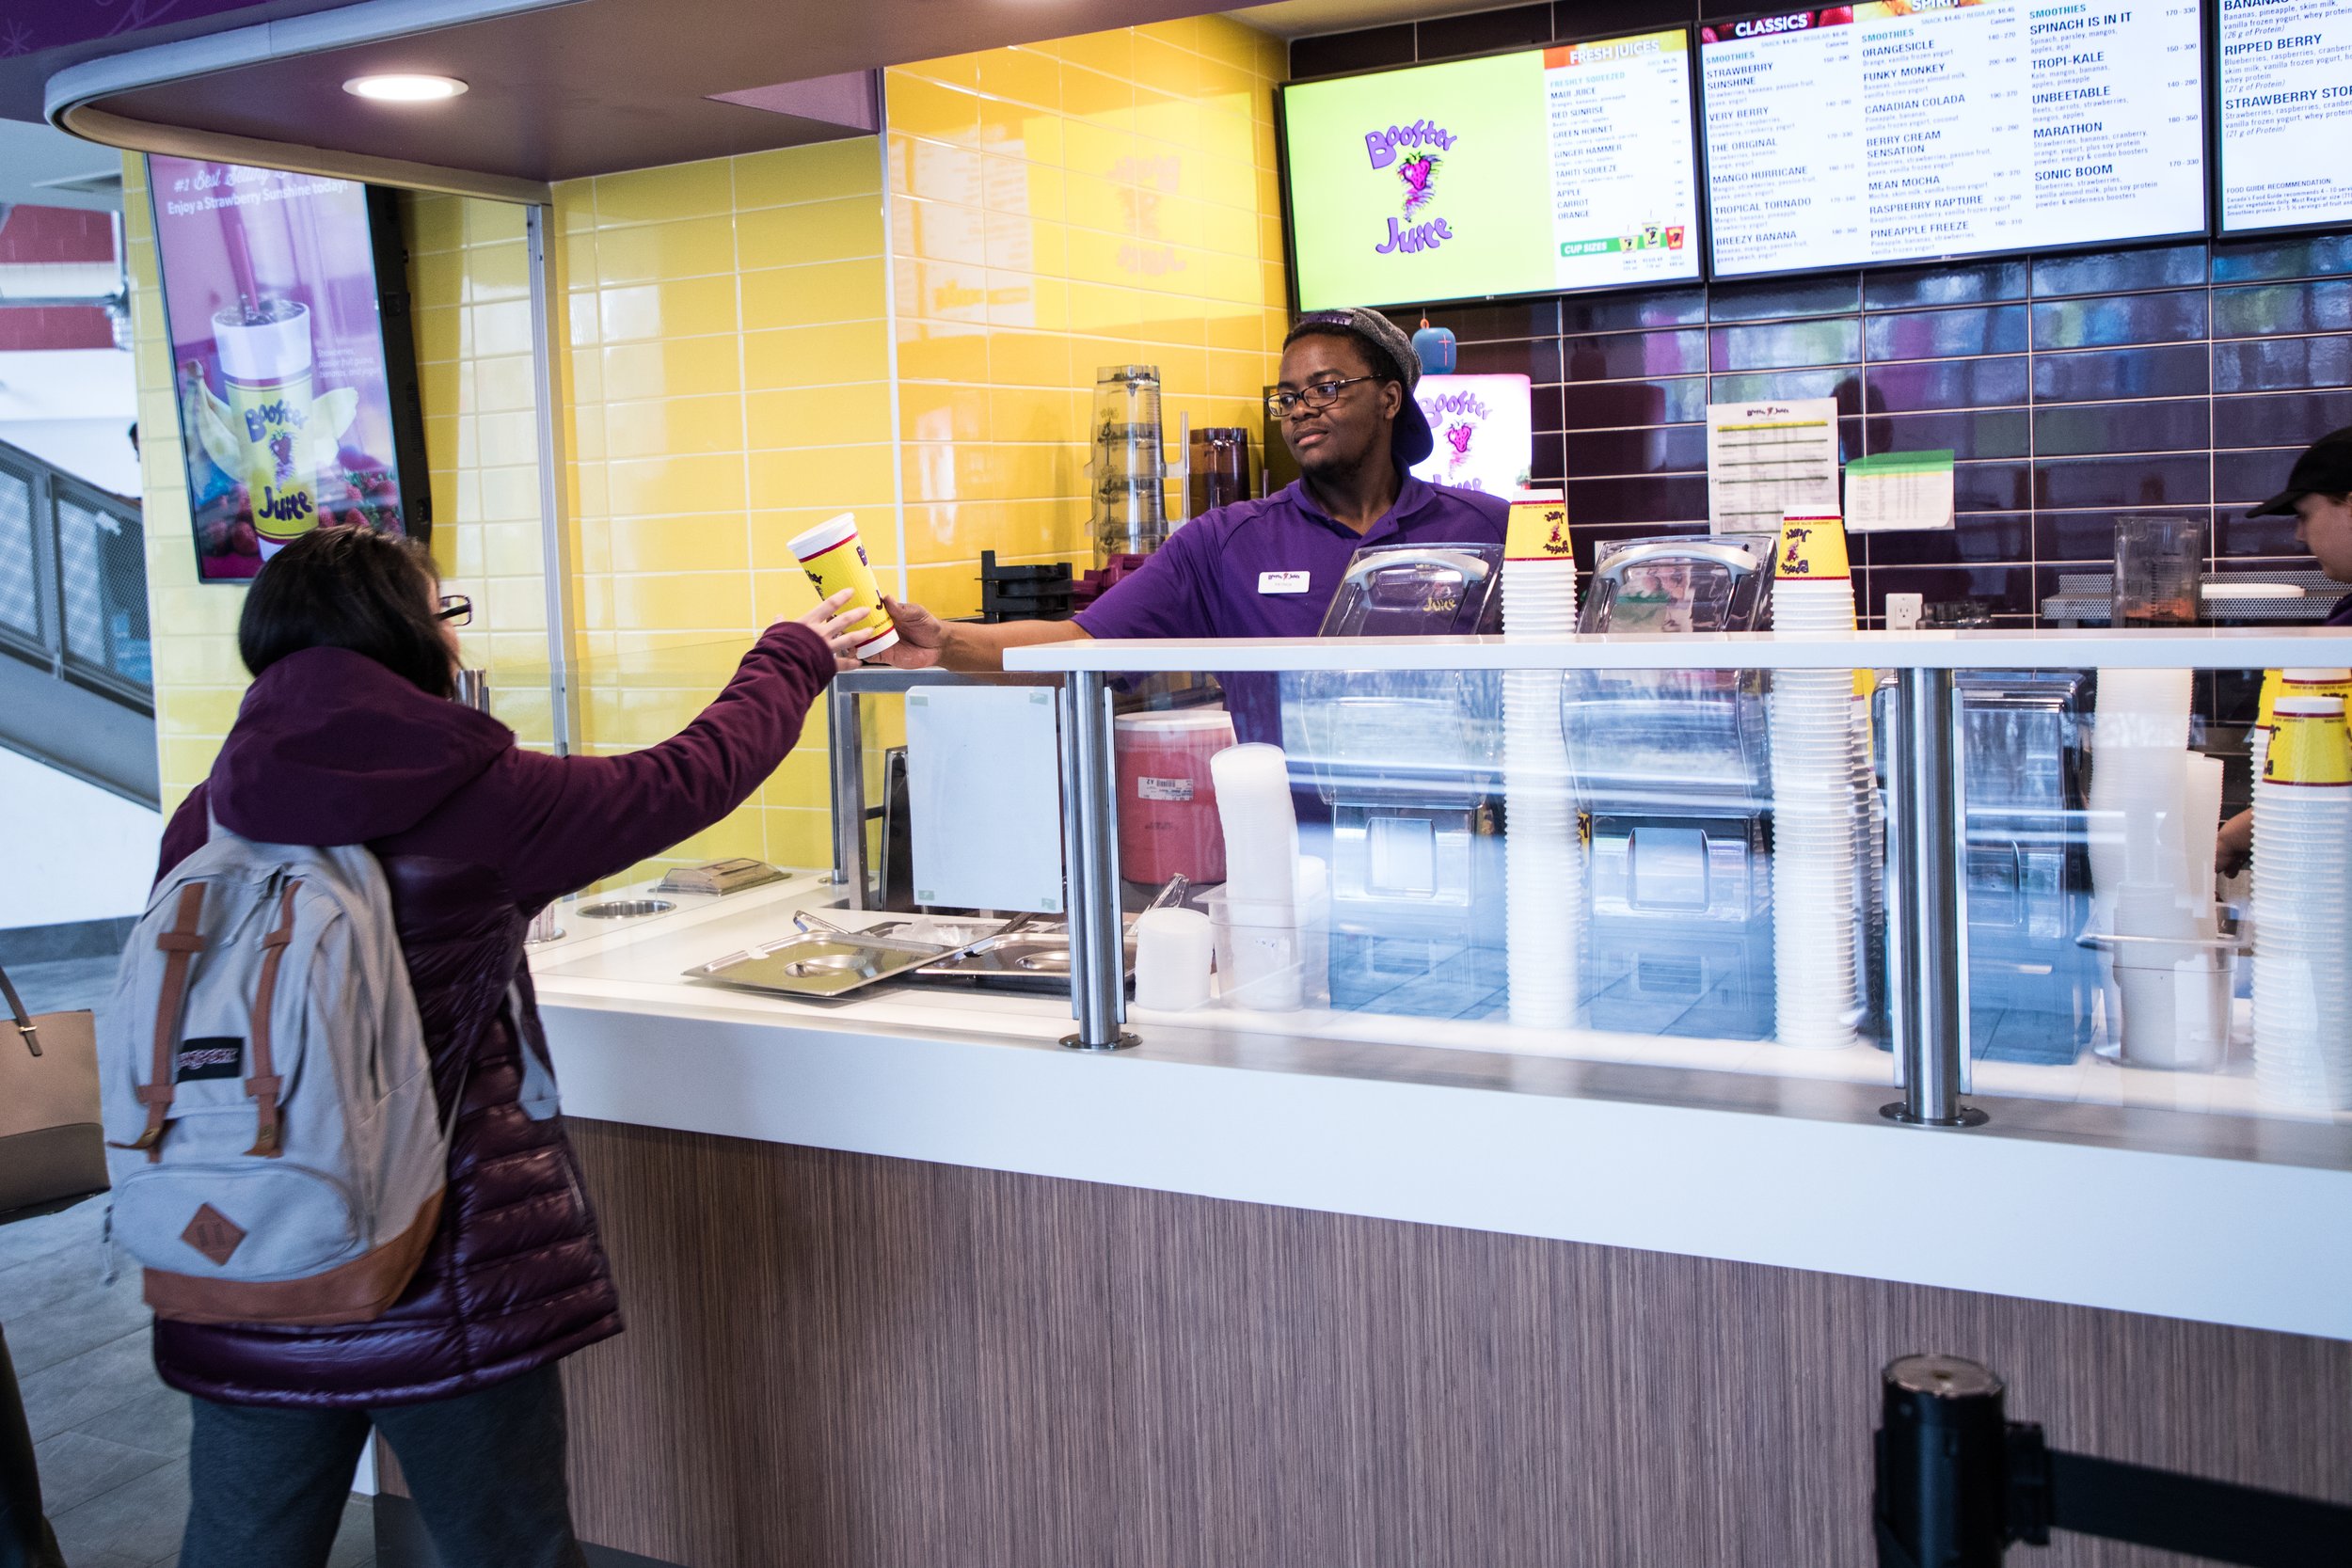  A student reaching for a Booster Juice from an employee behind the cash desk.  